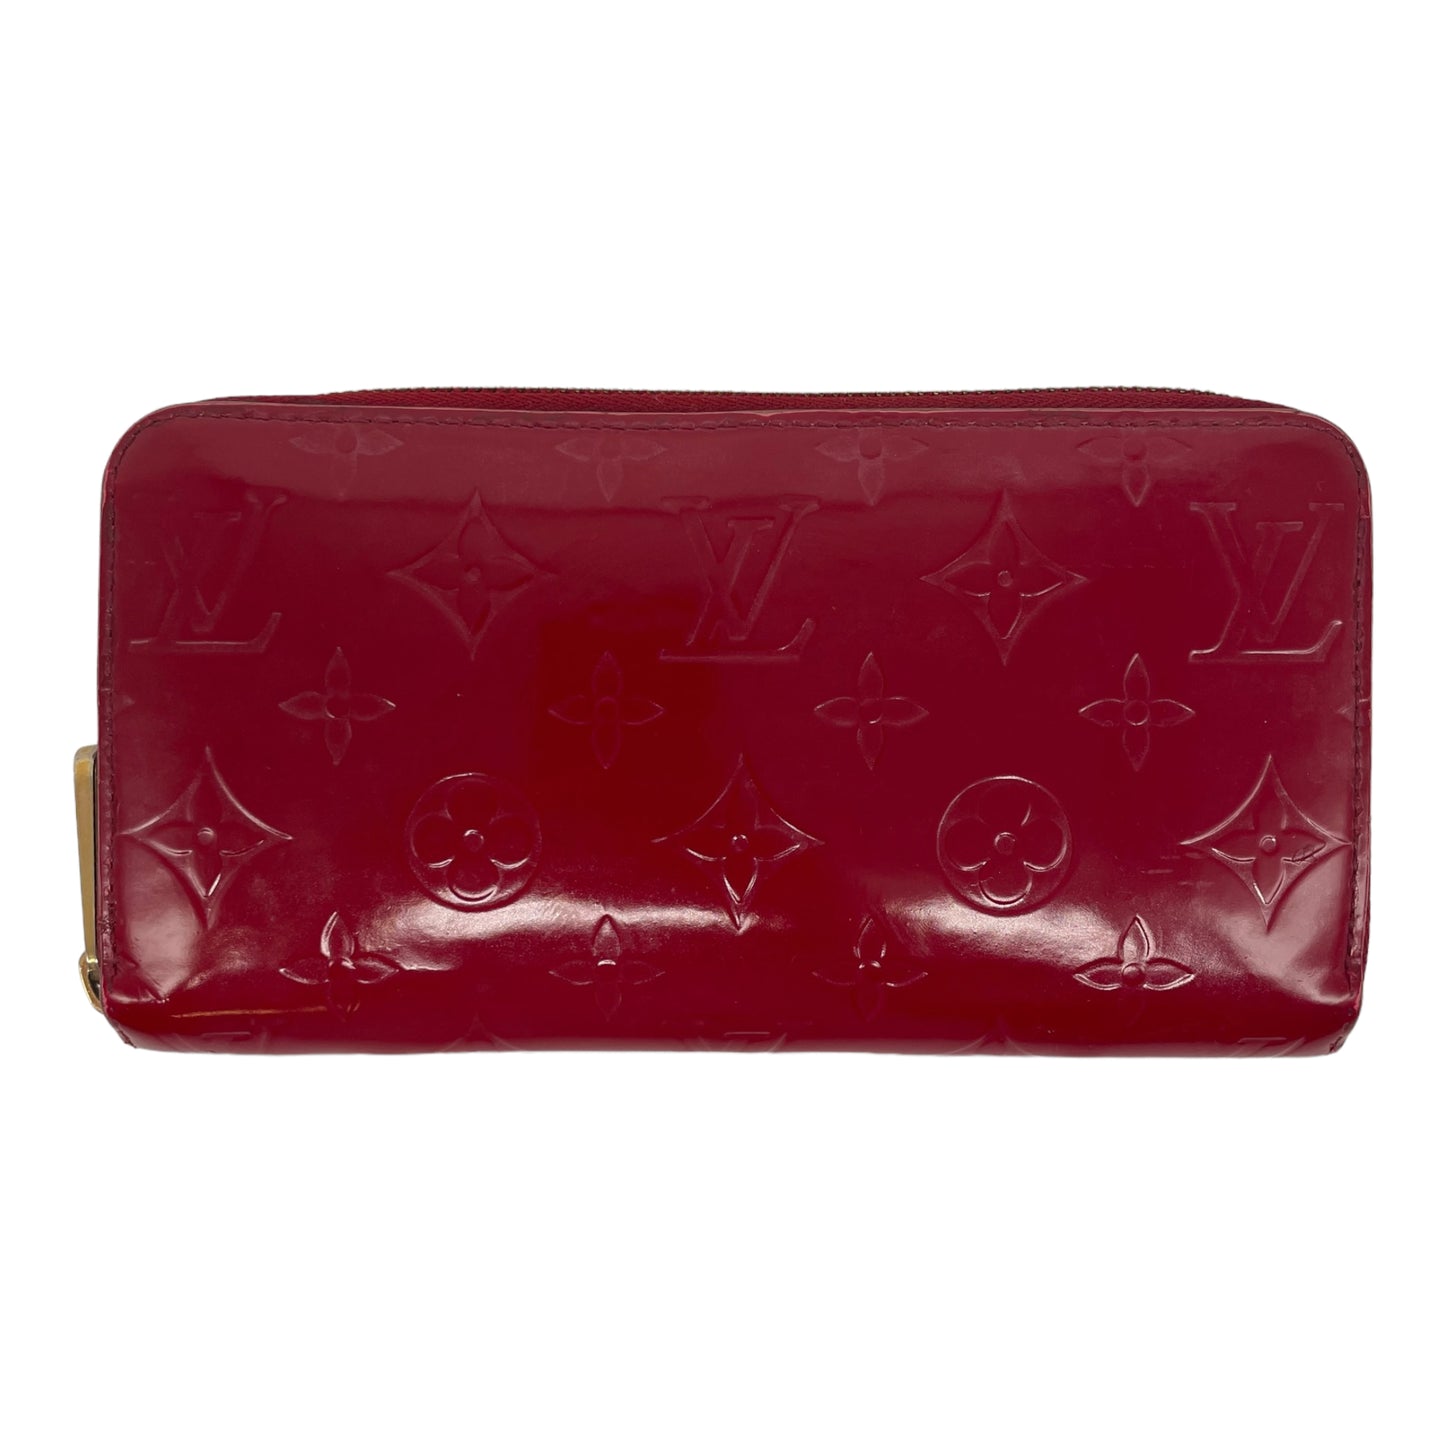 Authenticated Used Louis Vuitton Zippy Wallet Monogram Vernis Pomme  d'Amour Red